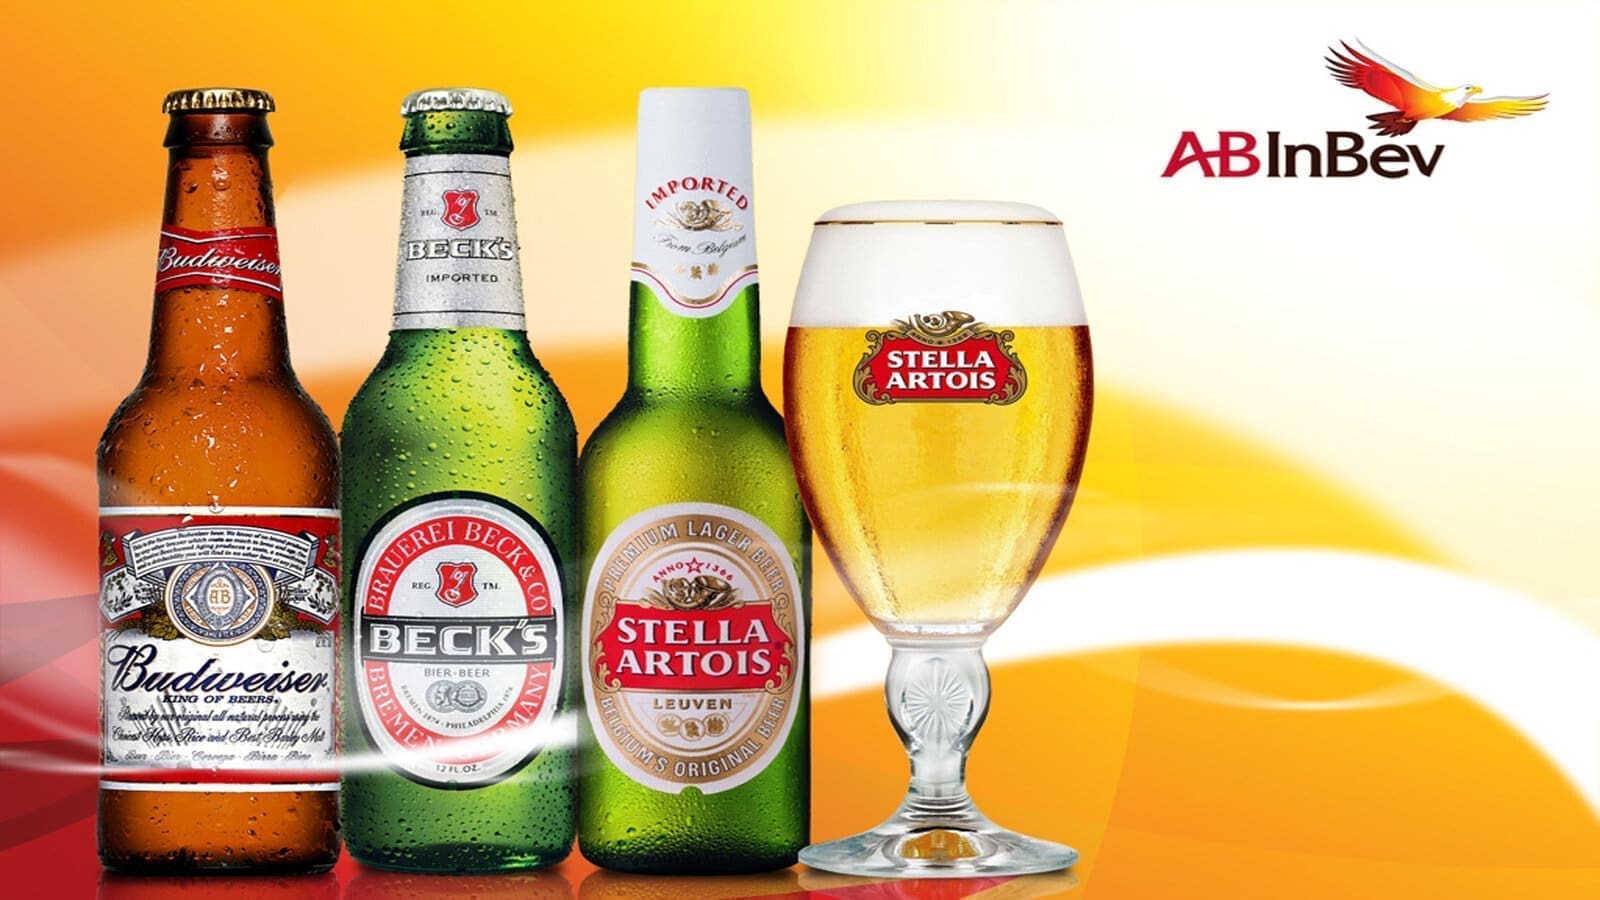 AB InBev invests US$34m in expanding production of non-alcoholic beer portfolio